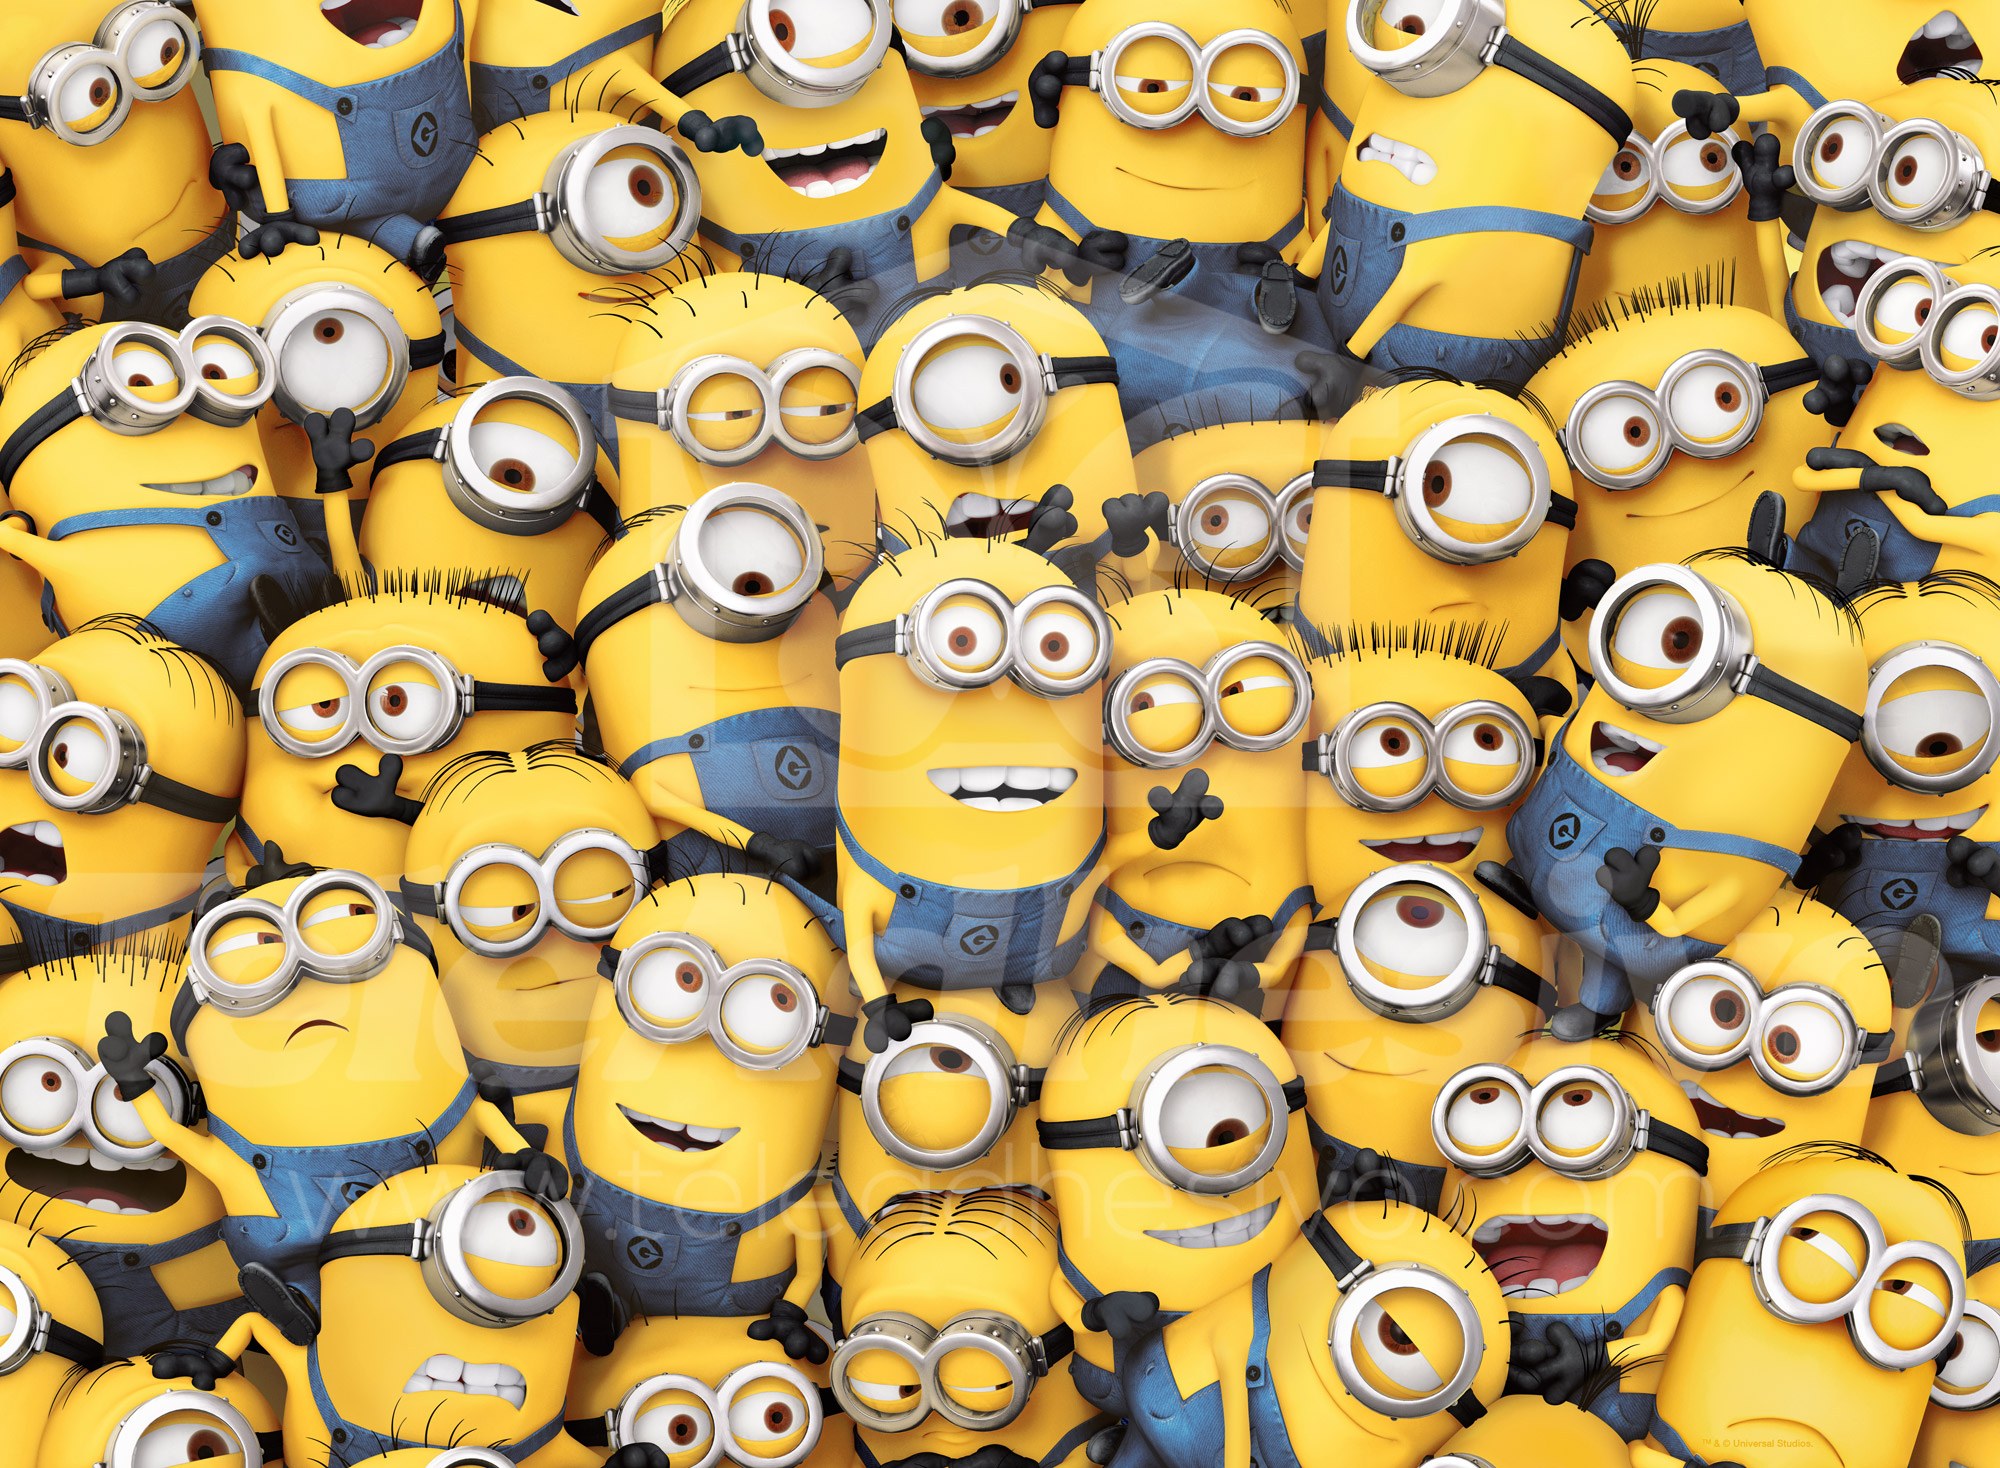 Fotomurales: Minions